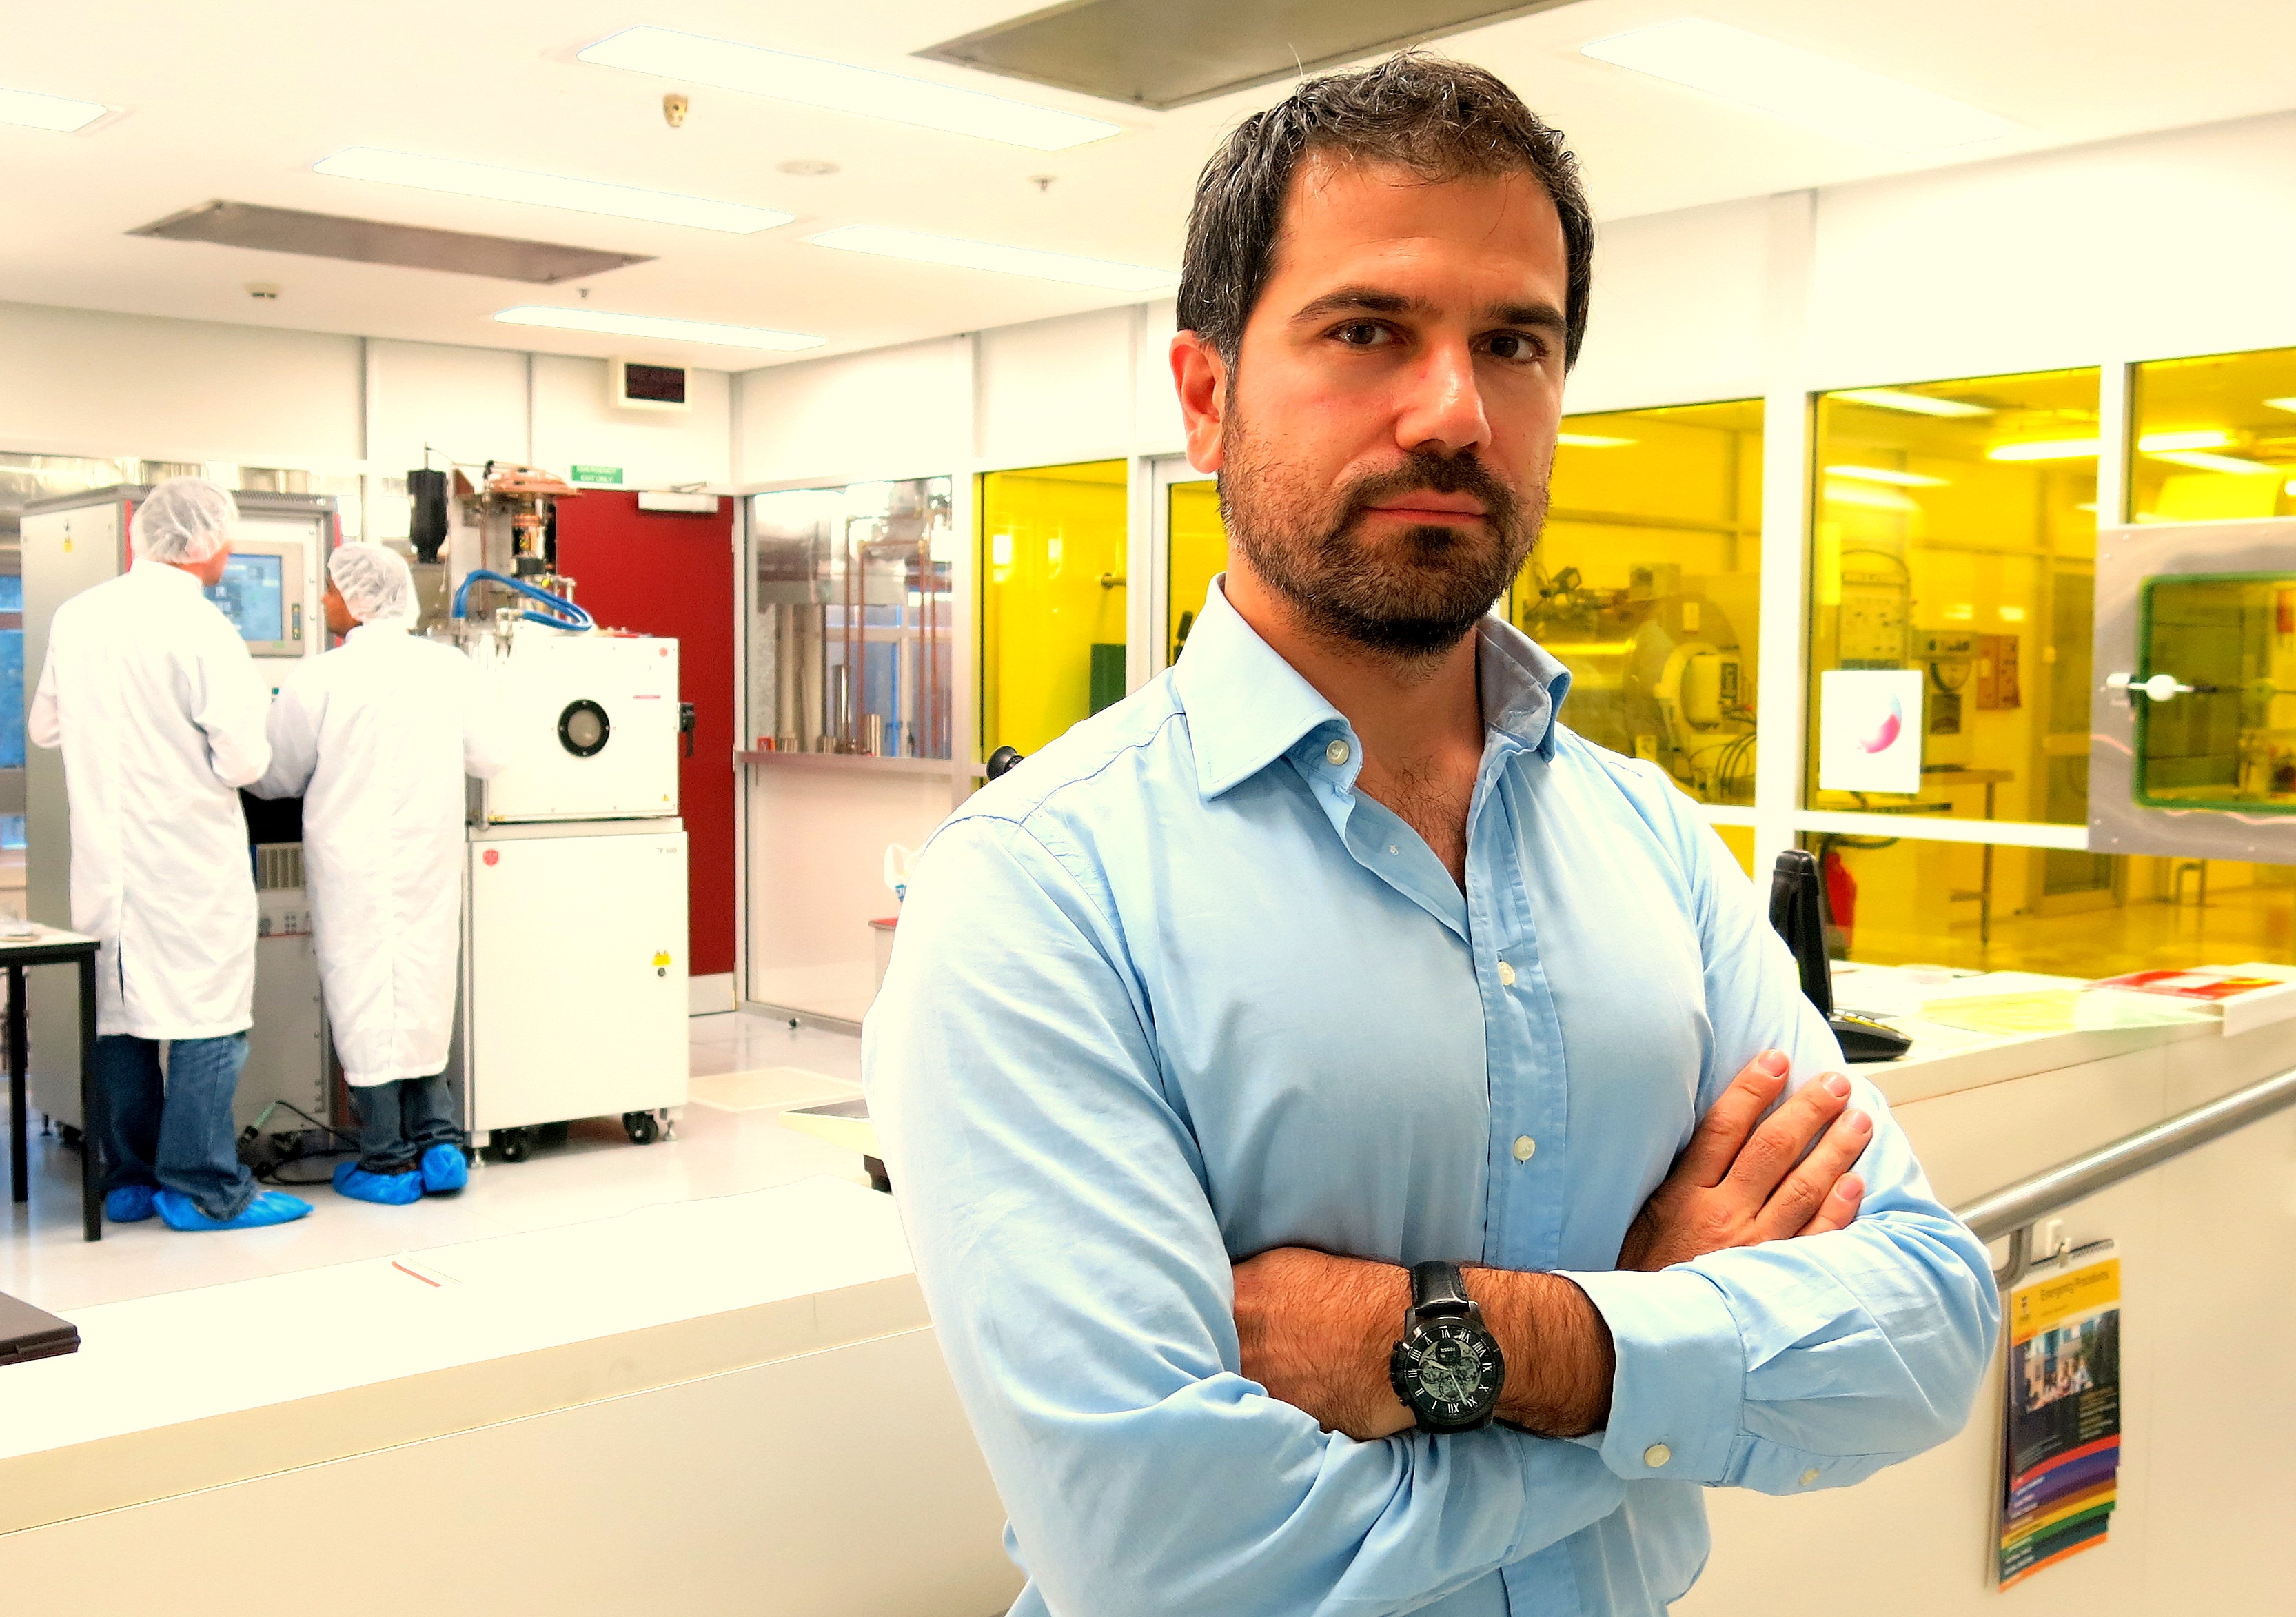 Dr Alessandro Rossi, winner of the 2015 National Measurement Institute Prize